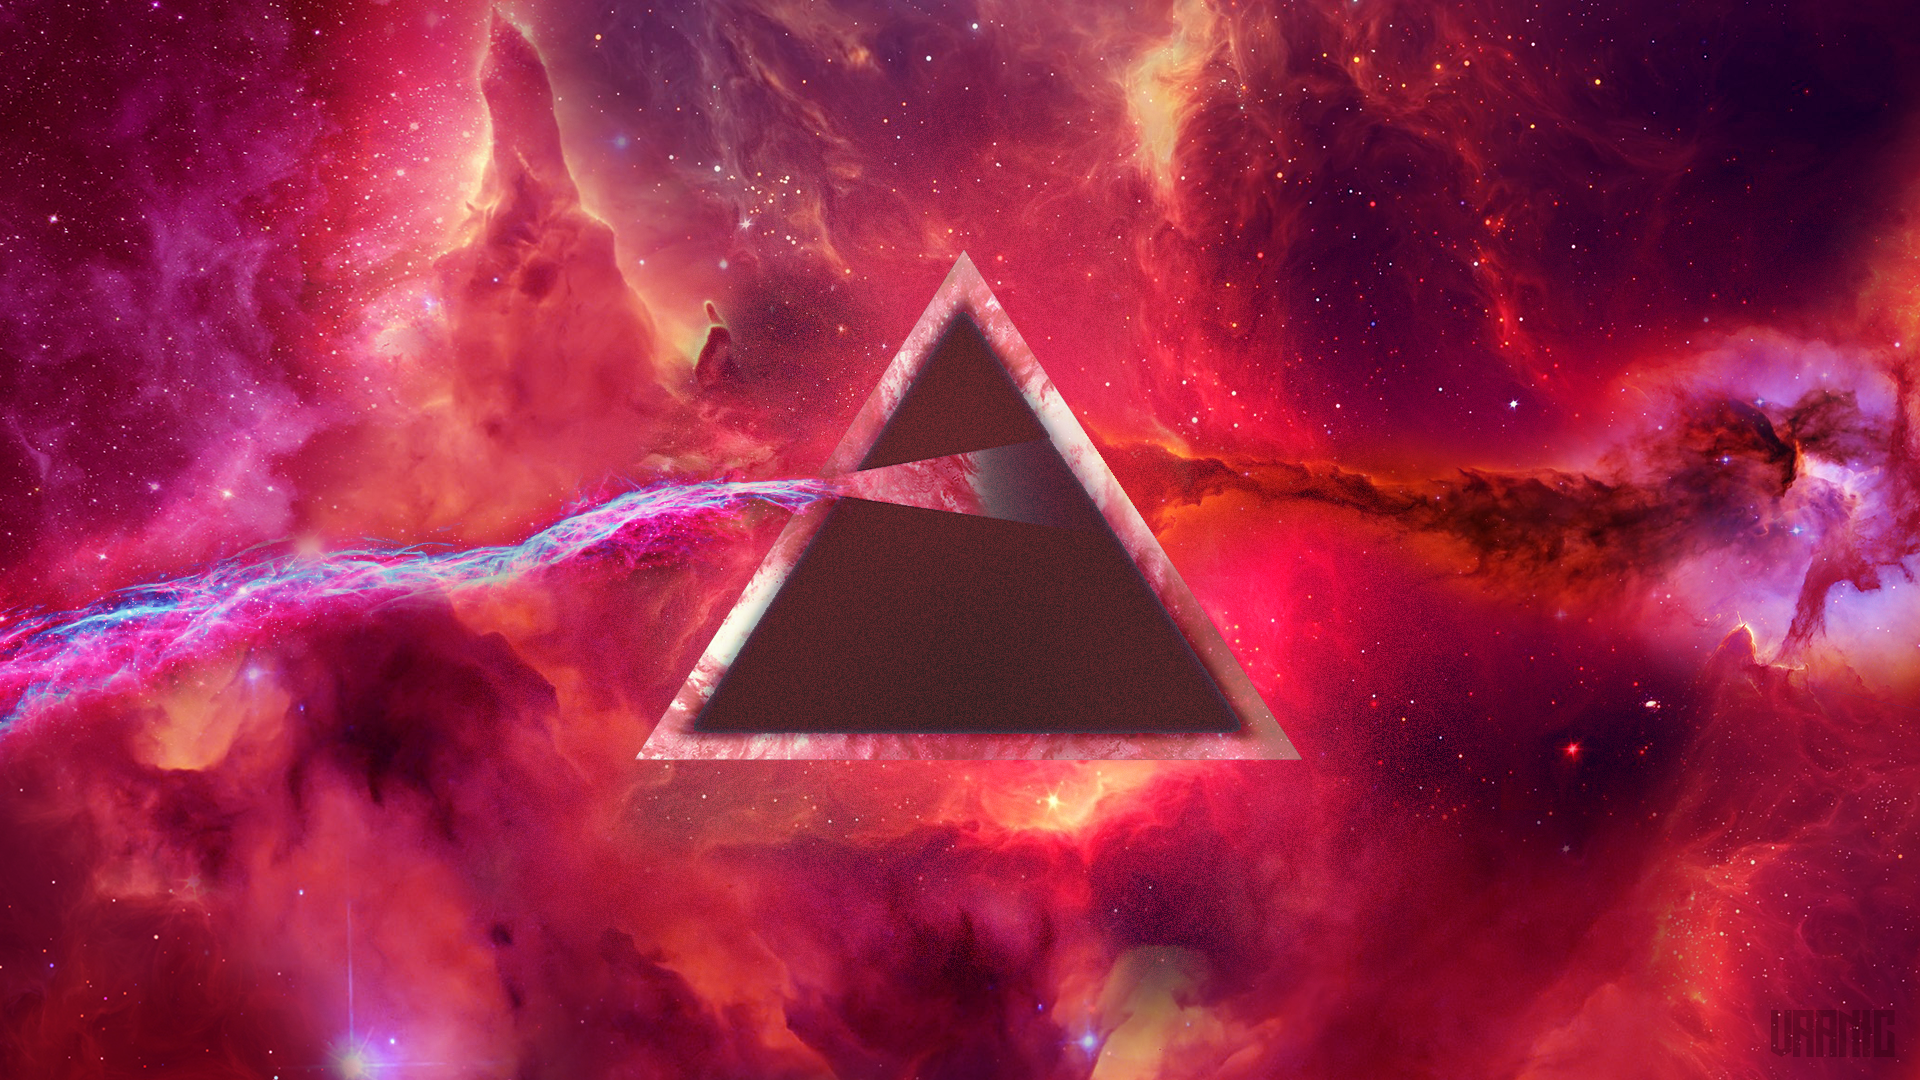 Pink Floyd The Dark Side Of The Moon Andromeda Guitar Classic Rock Red Triangle Space Art 1920x1080